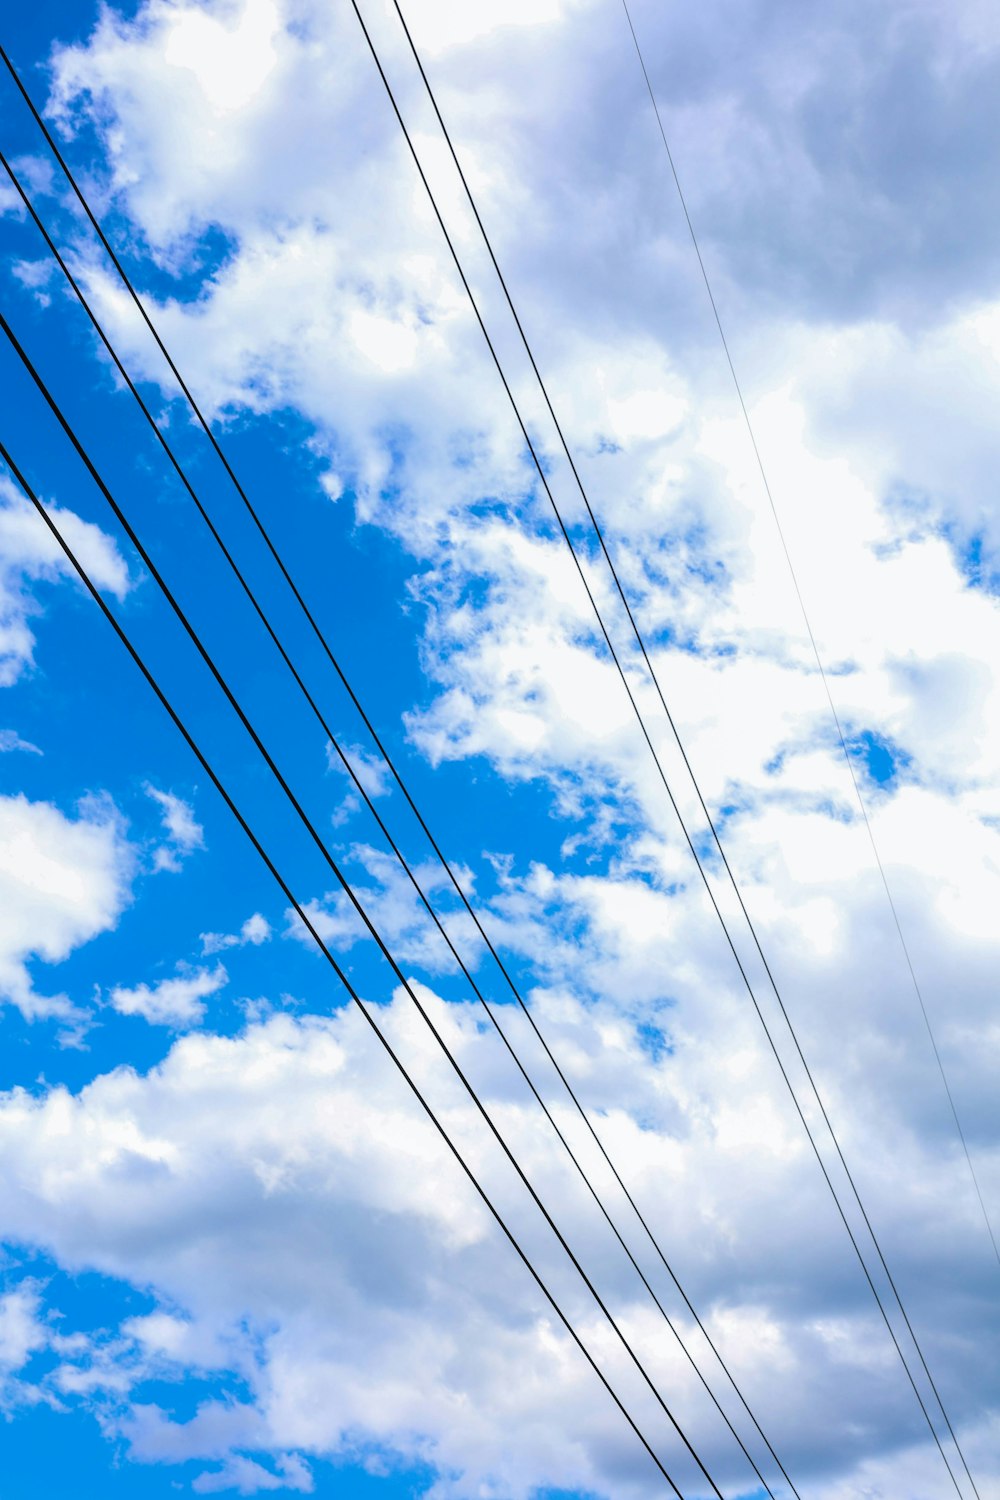 power lines and telephone poles against a blue sky